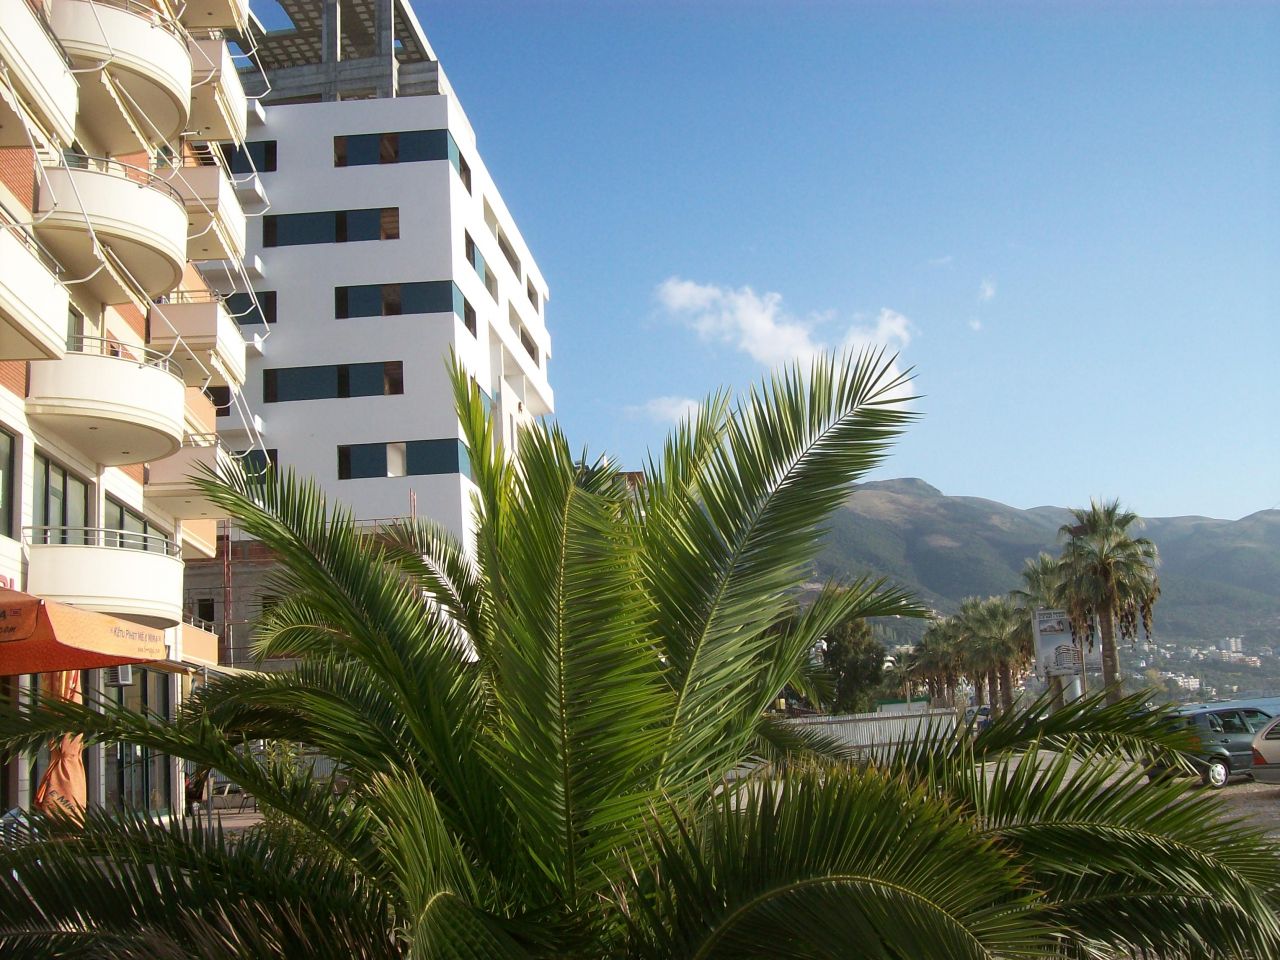 Apartments for sale in Vlora, close to the sea. Beautiful nature and great conditions. 